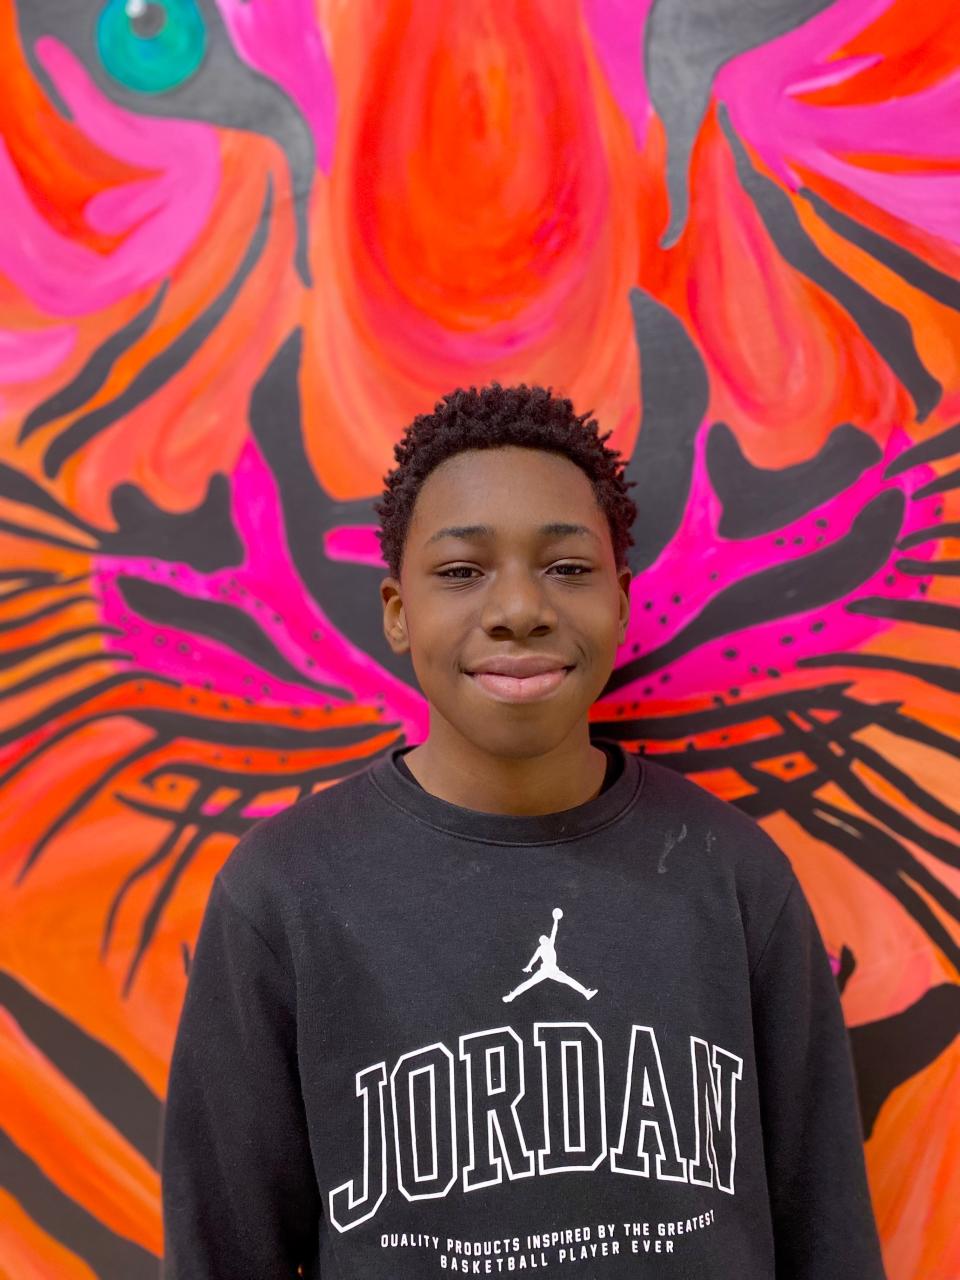 Isaiah Washington, a ninth-grader at Riverside University High School, won first place in the Grades 9-10 category of the 41st Martin Luther King Jr. Essay contest, announced in January 2024.